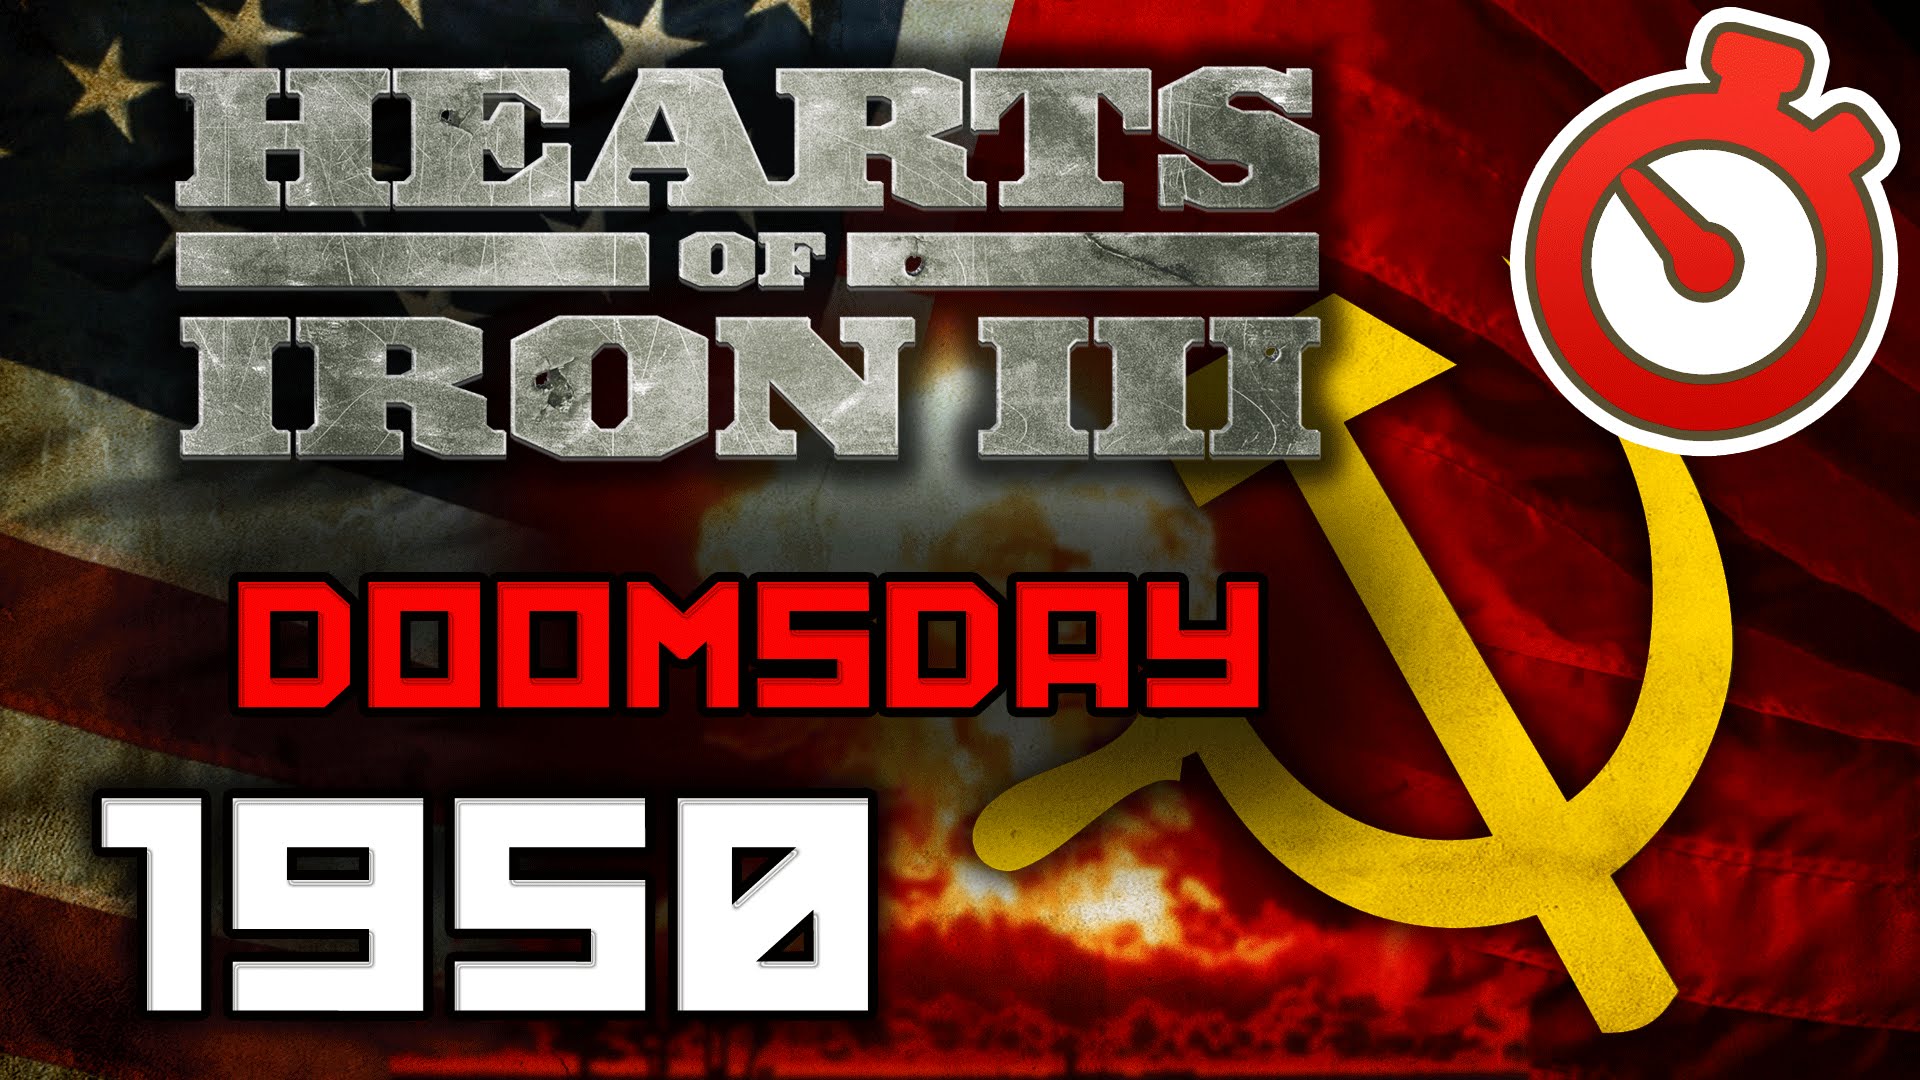 Hearts of Iron 3 – Cold War Ignites Doomsday World War 3 1950 Timelapse